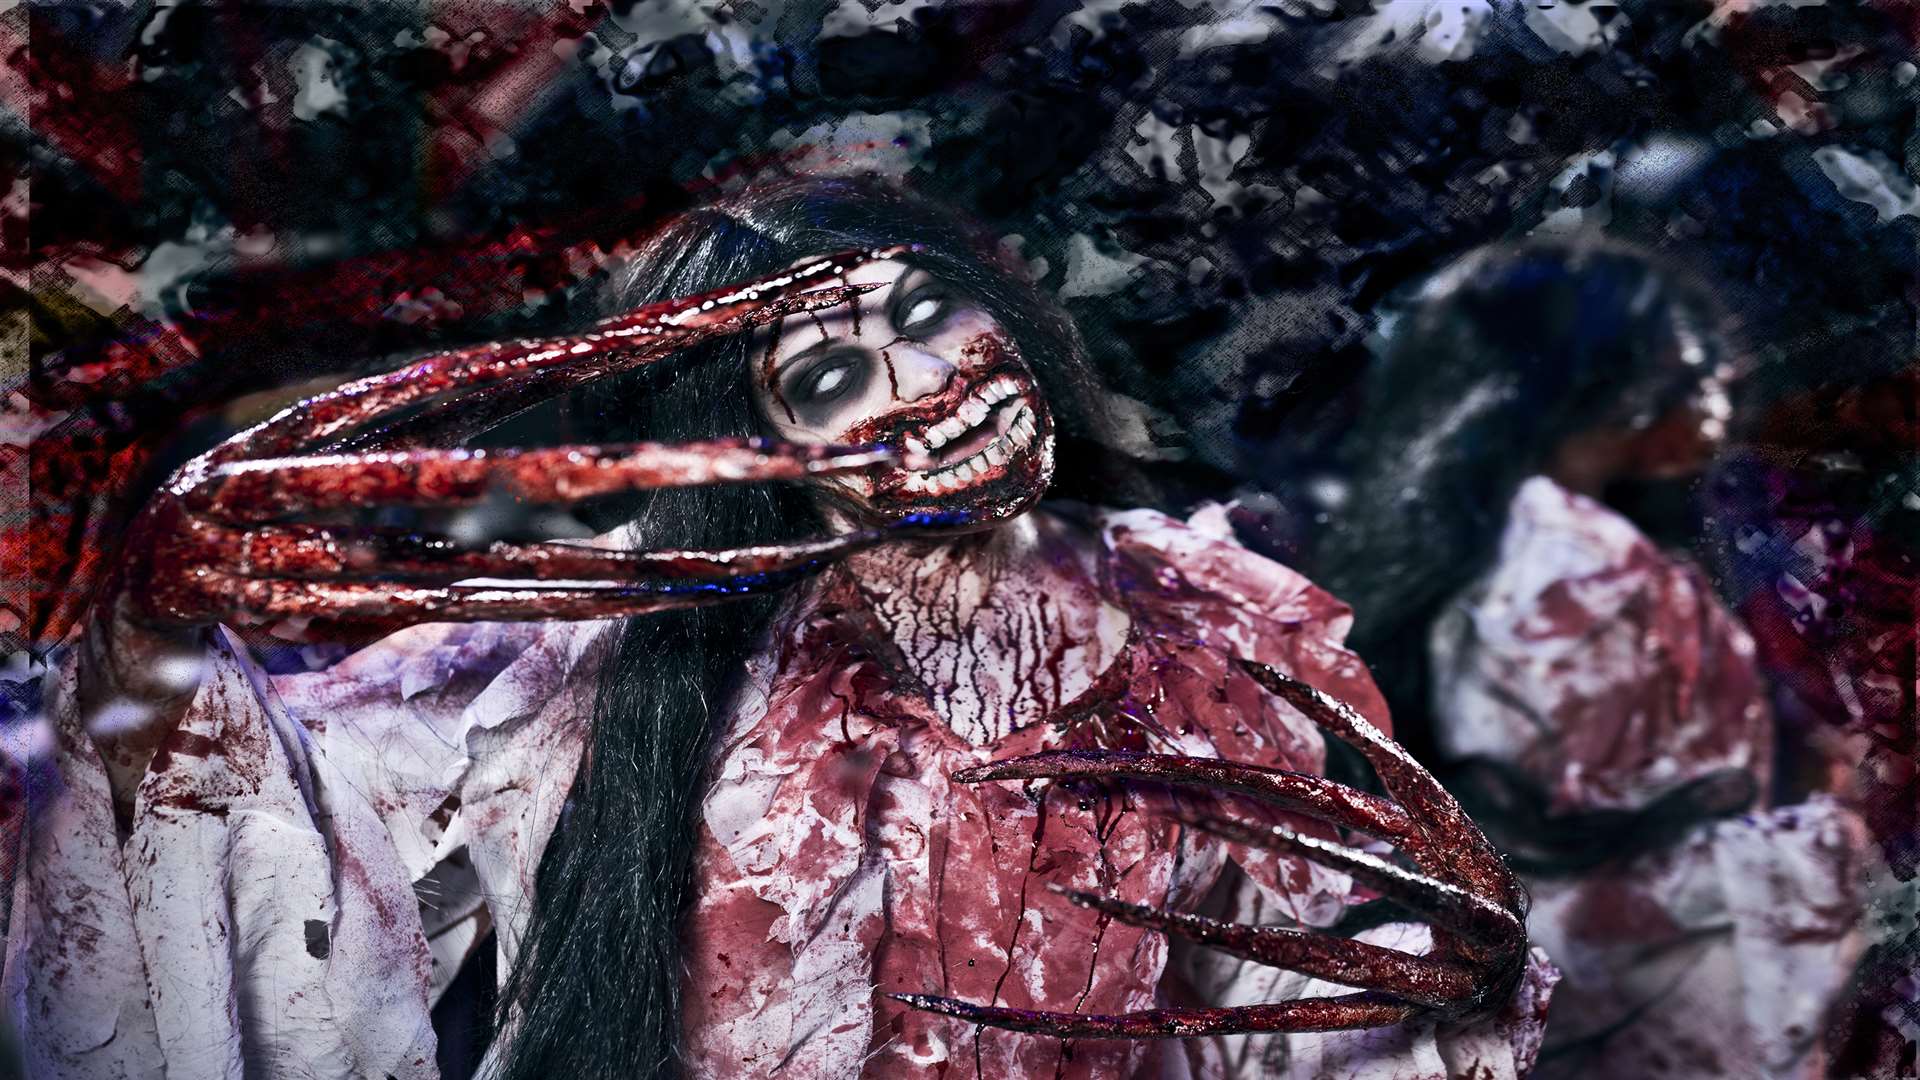 Meet Bloody Mary at Screamland this Halloween